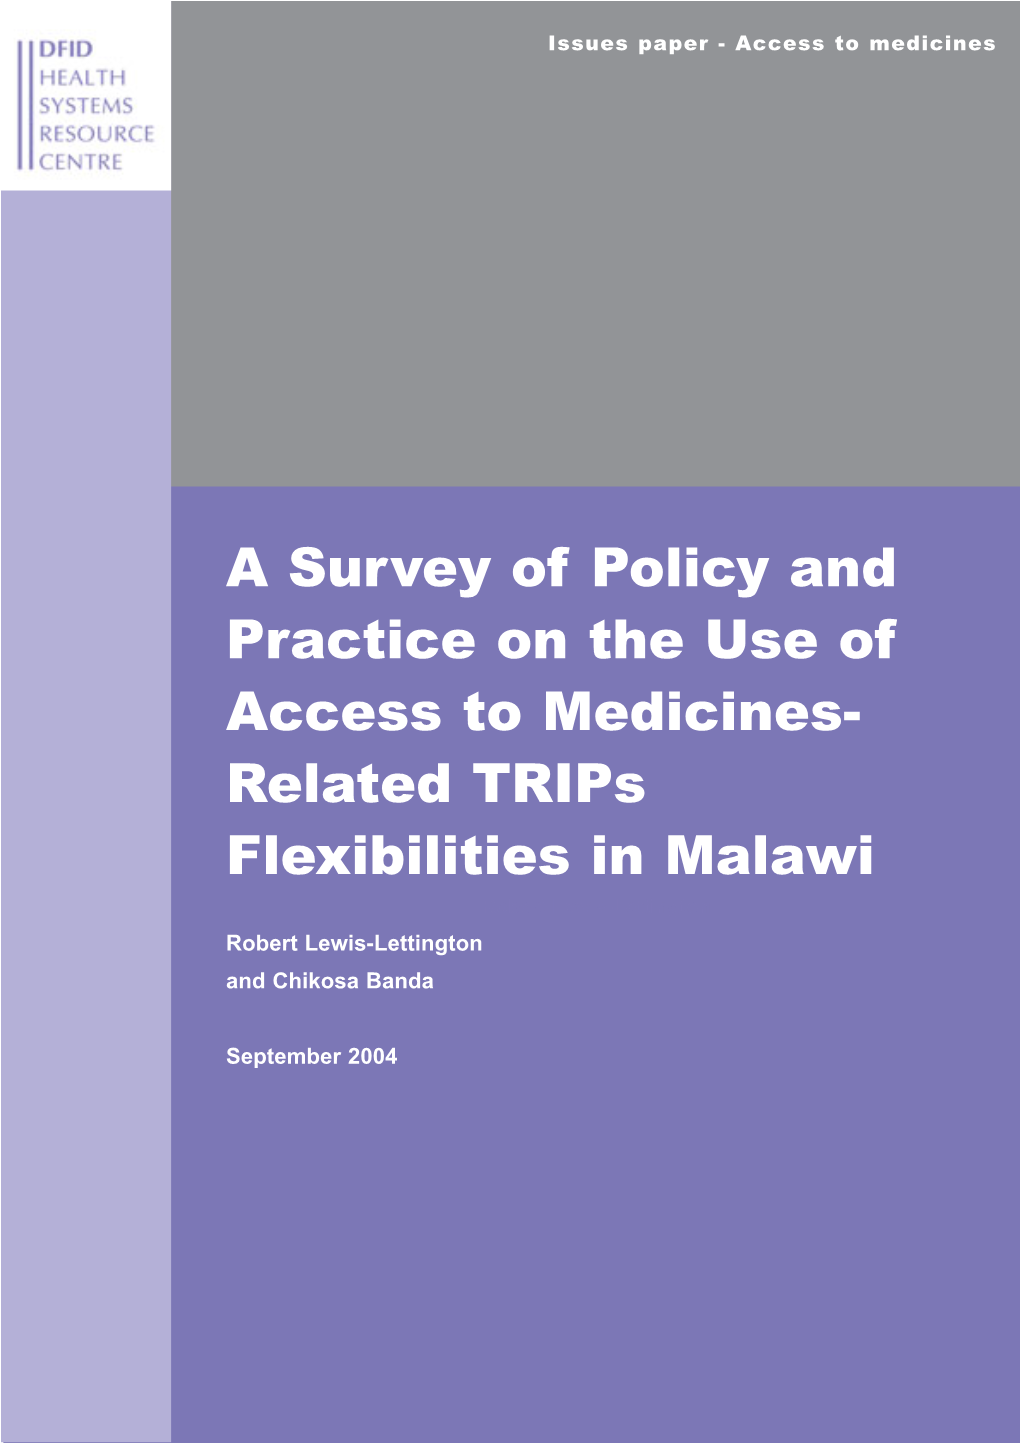 A Survey of Policy and Practice on the Use of Access to Medicines